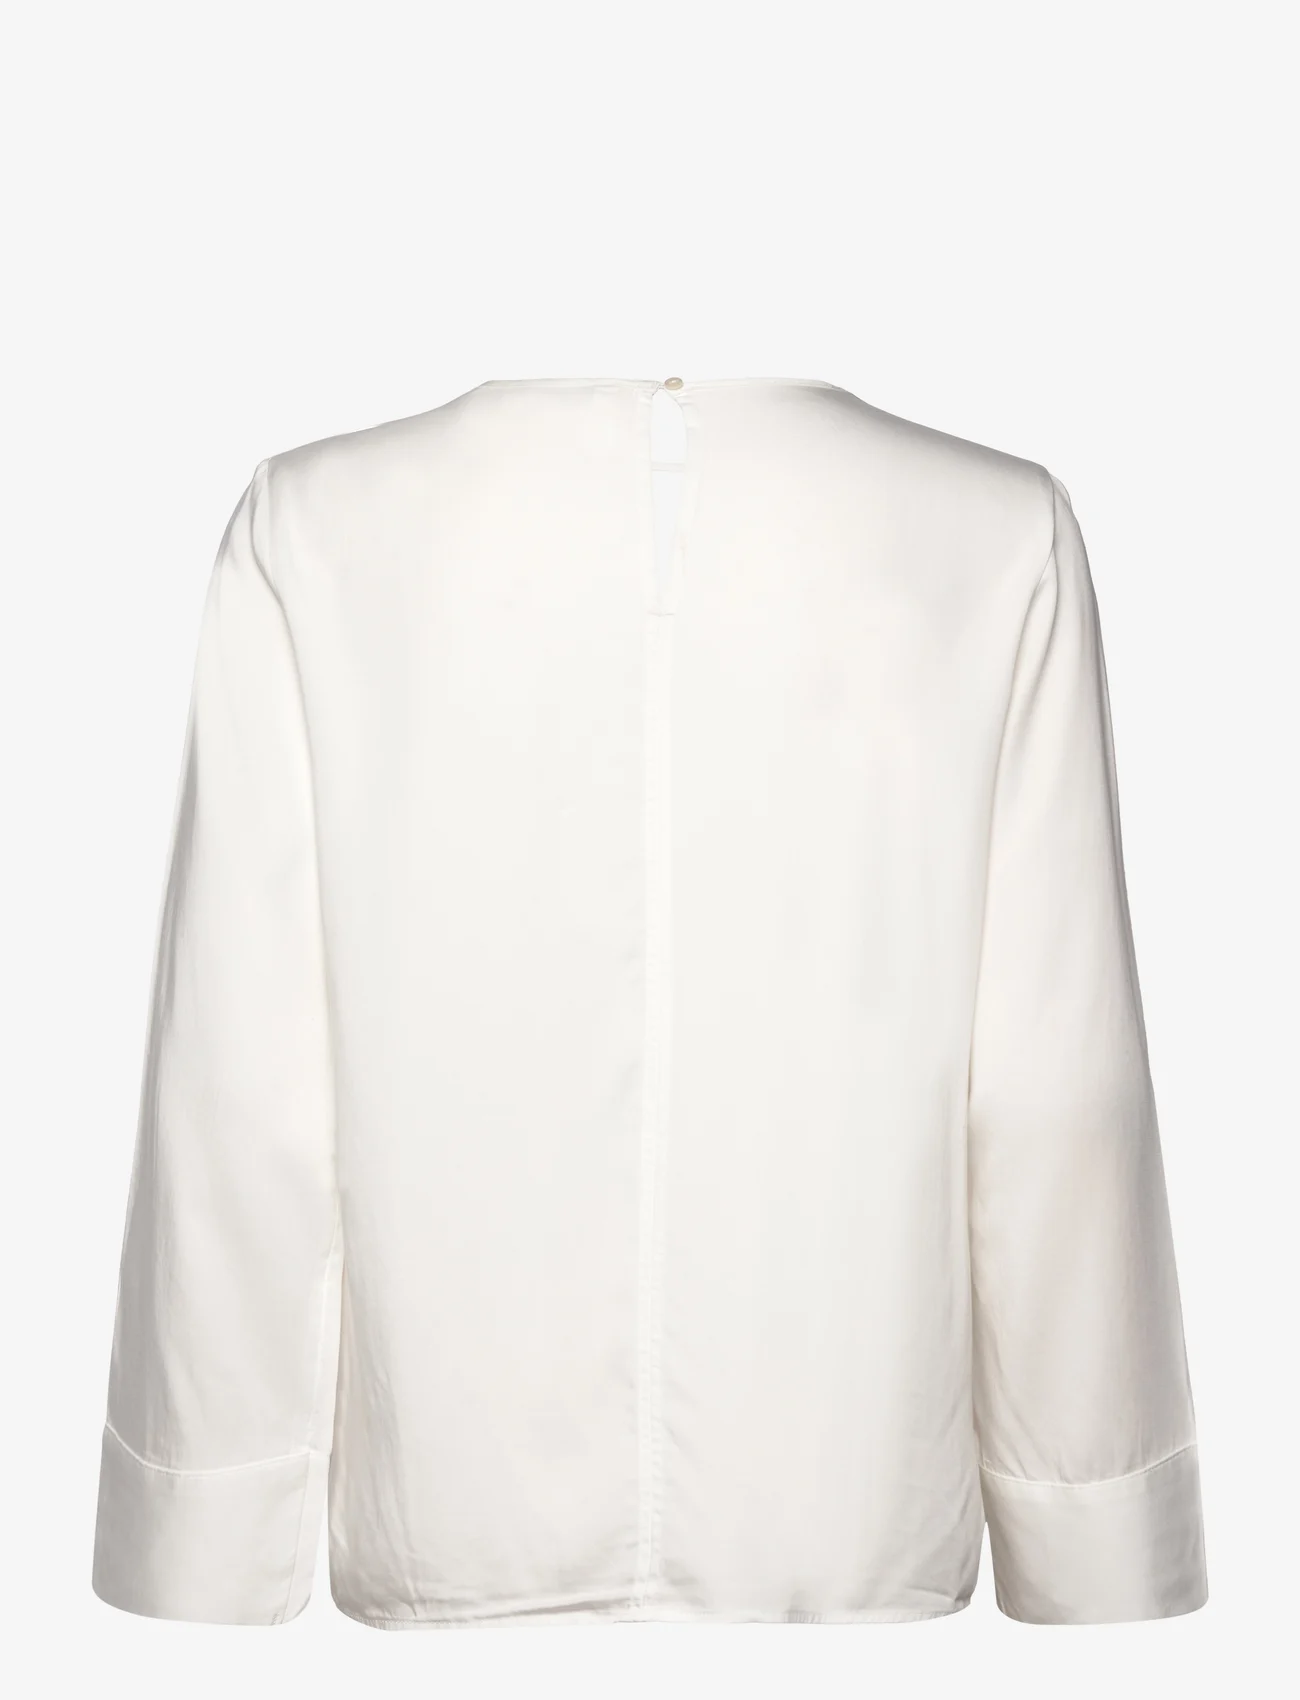 Tom Tailor - blouse with cut-out detail - langärmlige blusen - whisper white - 1